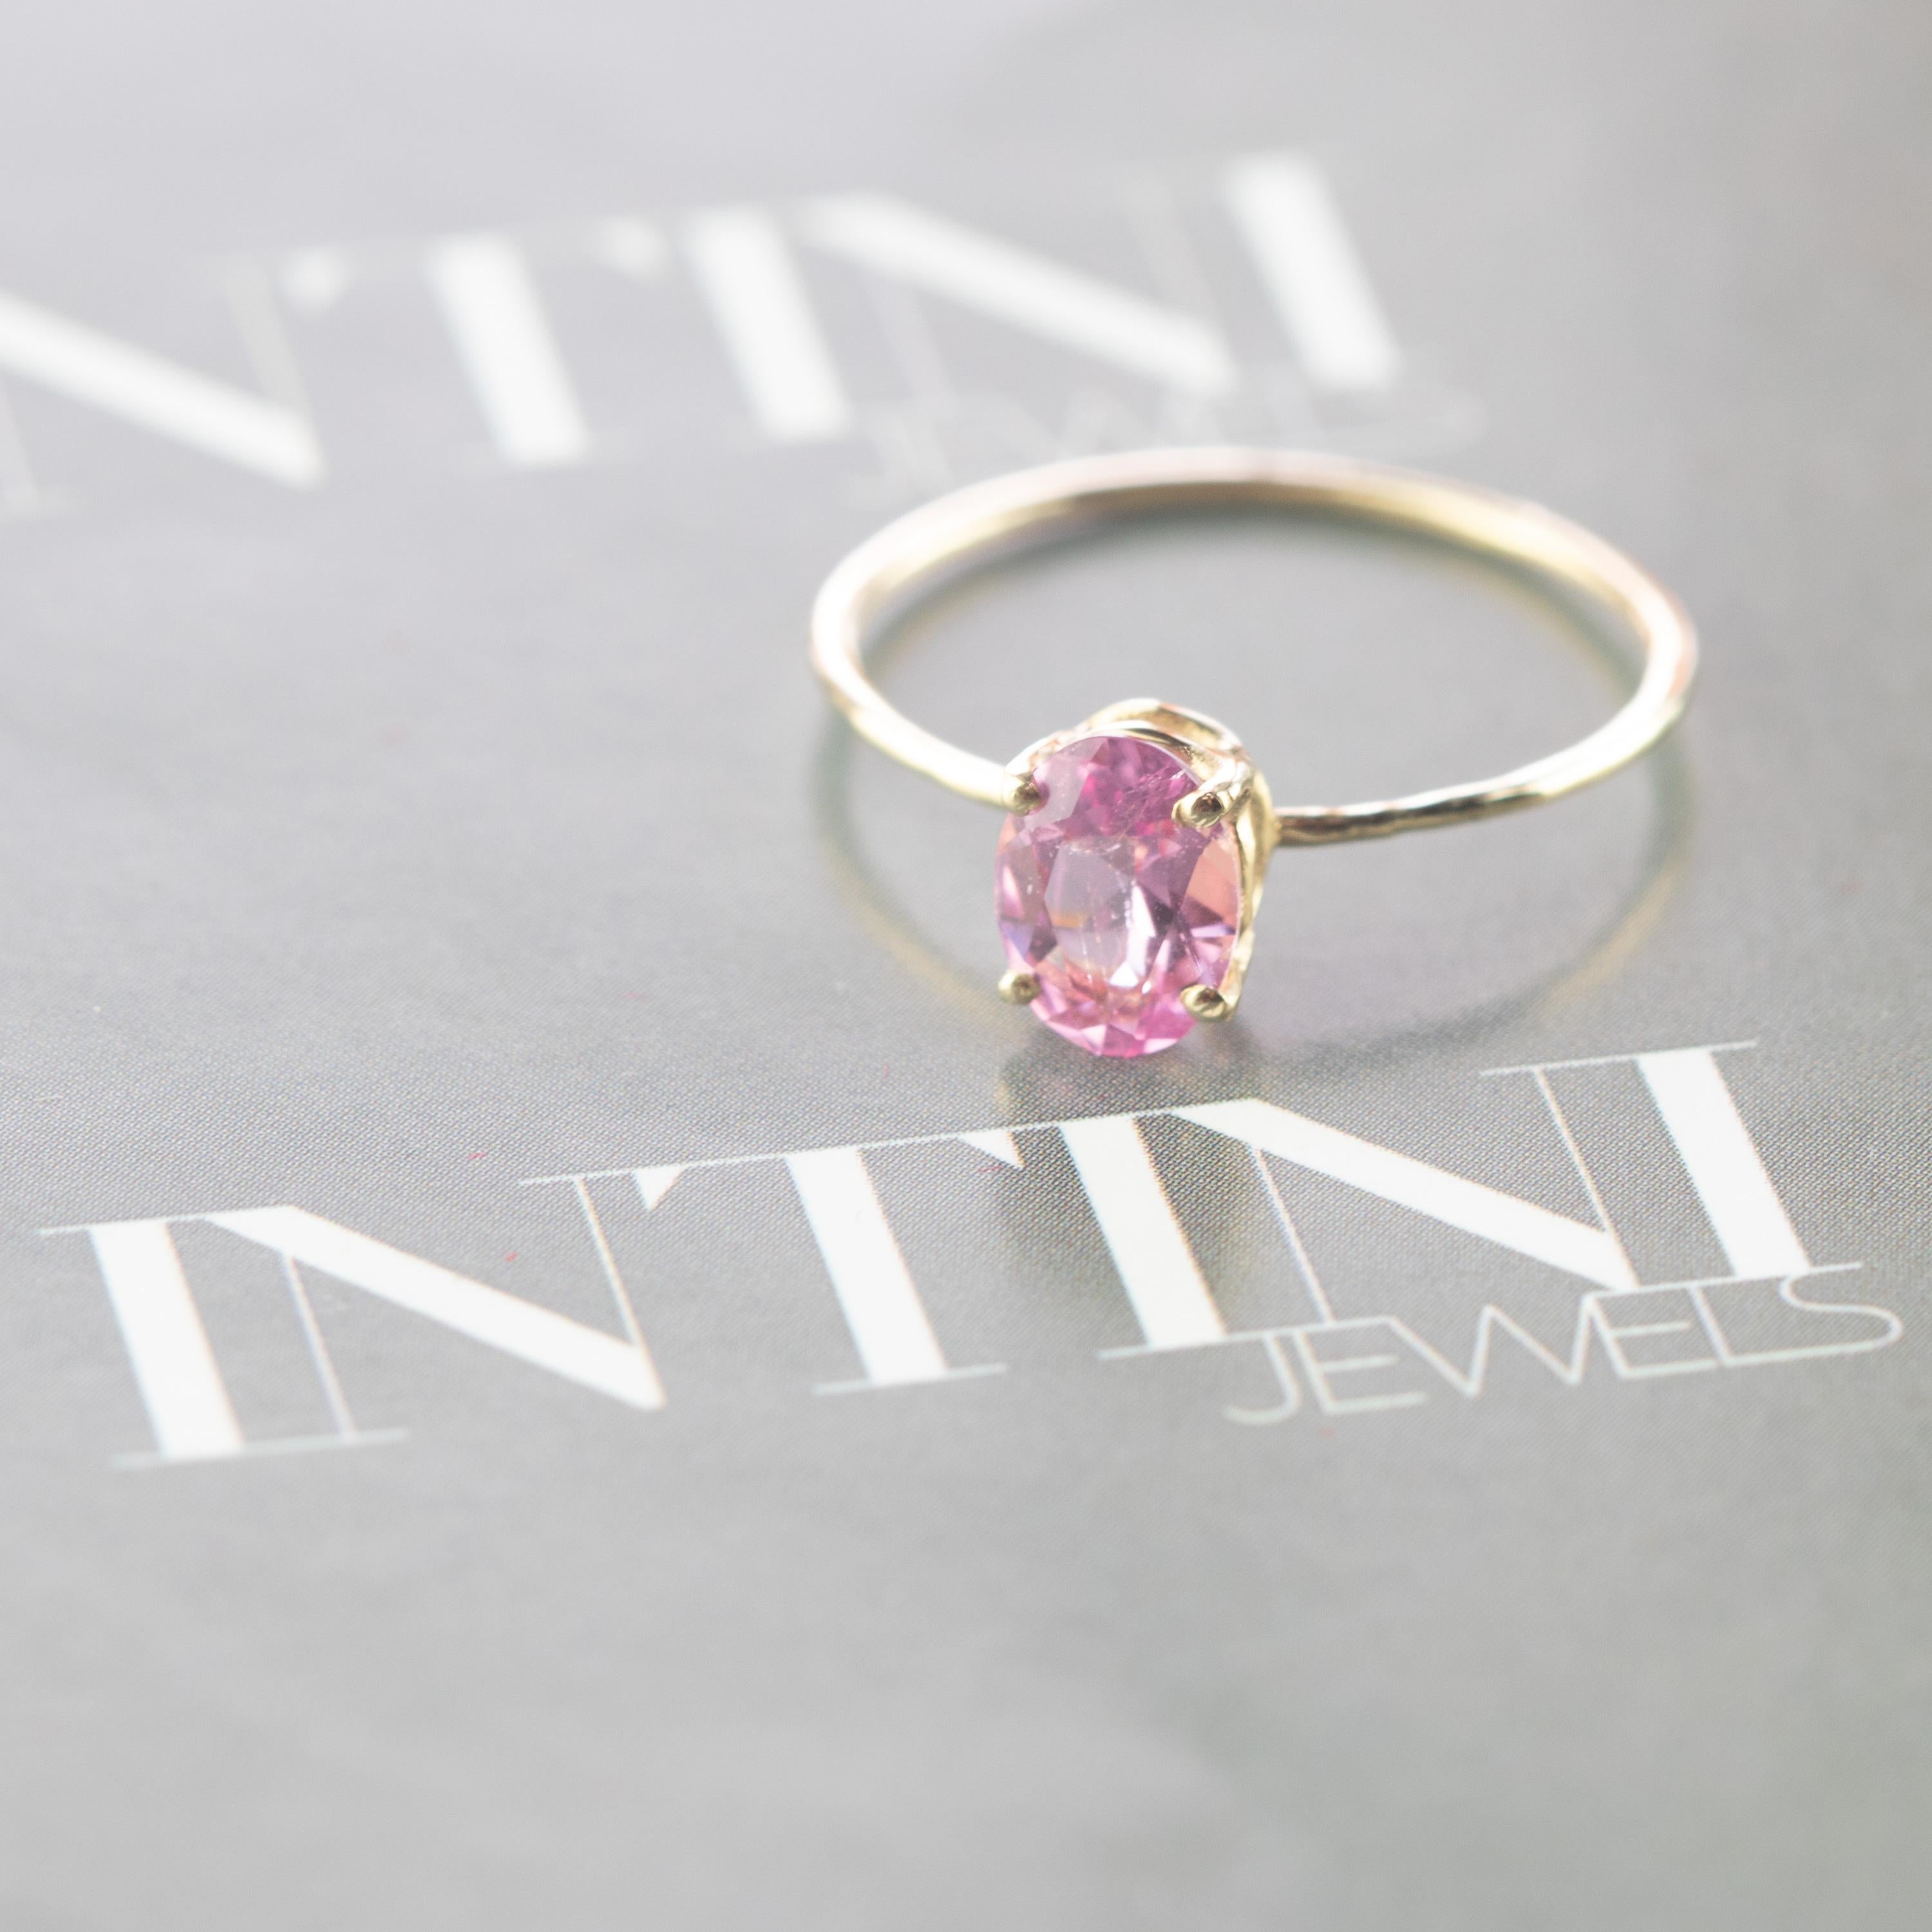 Signature INTINI Jewels Tourmaline jewellery. Modern and elegant midi ring design in 9k yellow gold with an oval cut with tiny griffes sormounting the ring. Oval, cocktail and handmade ring.

Pink Tourmaline graces the month of October with its